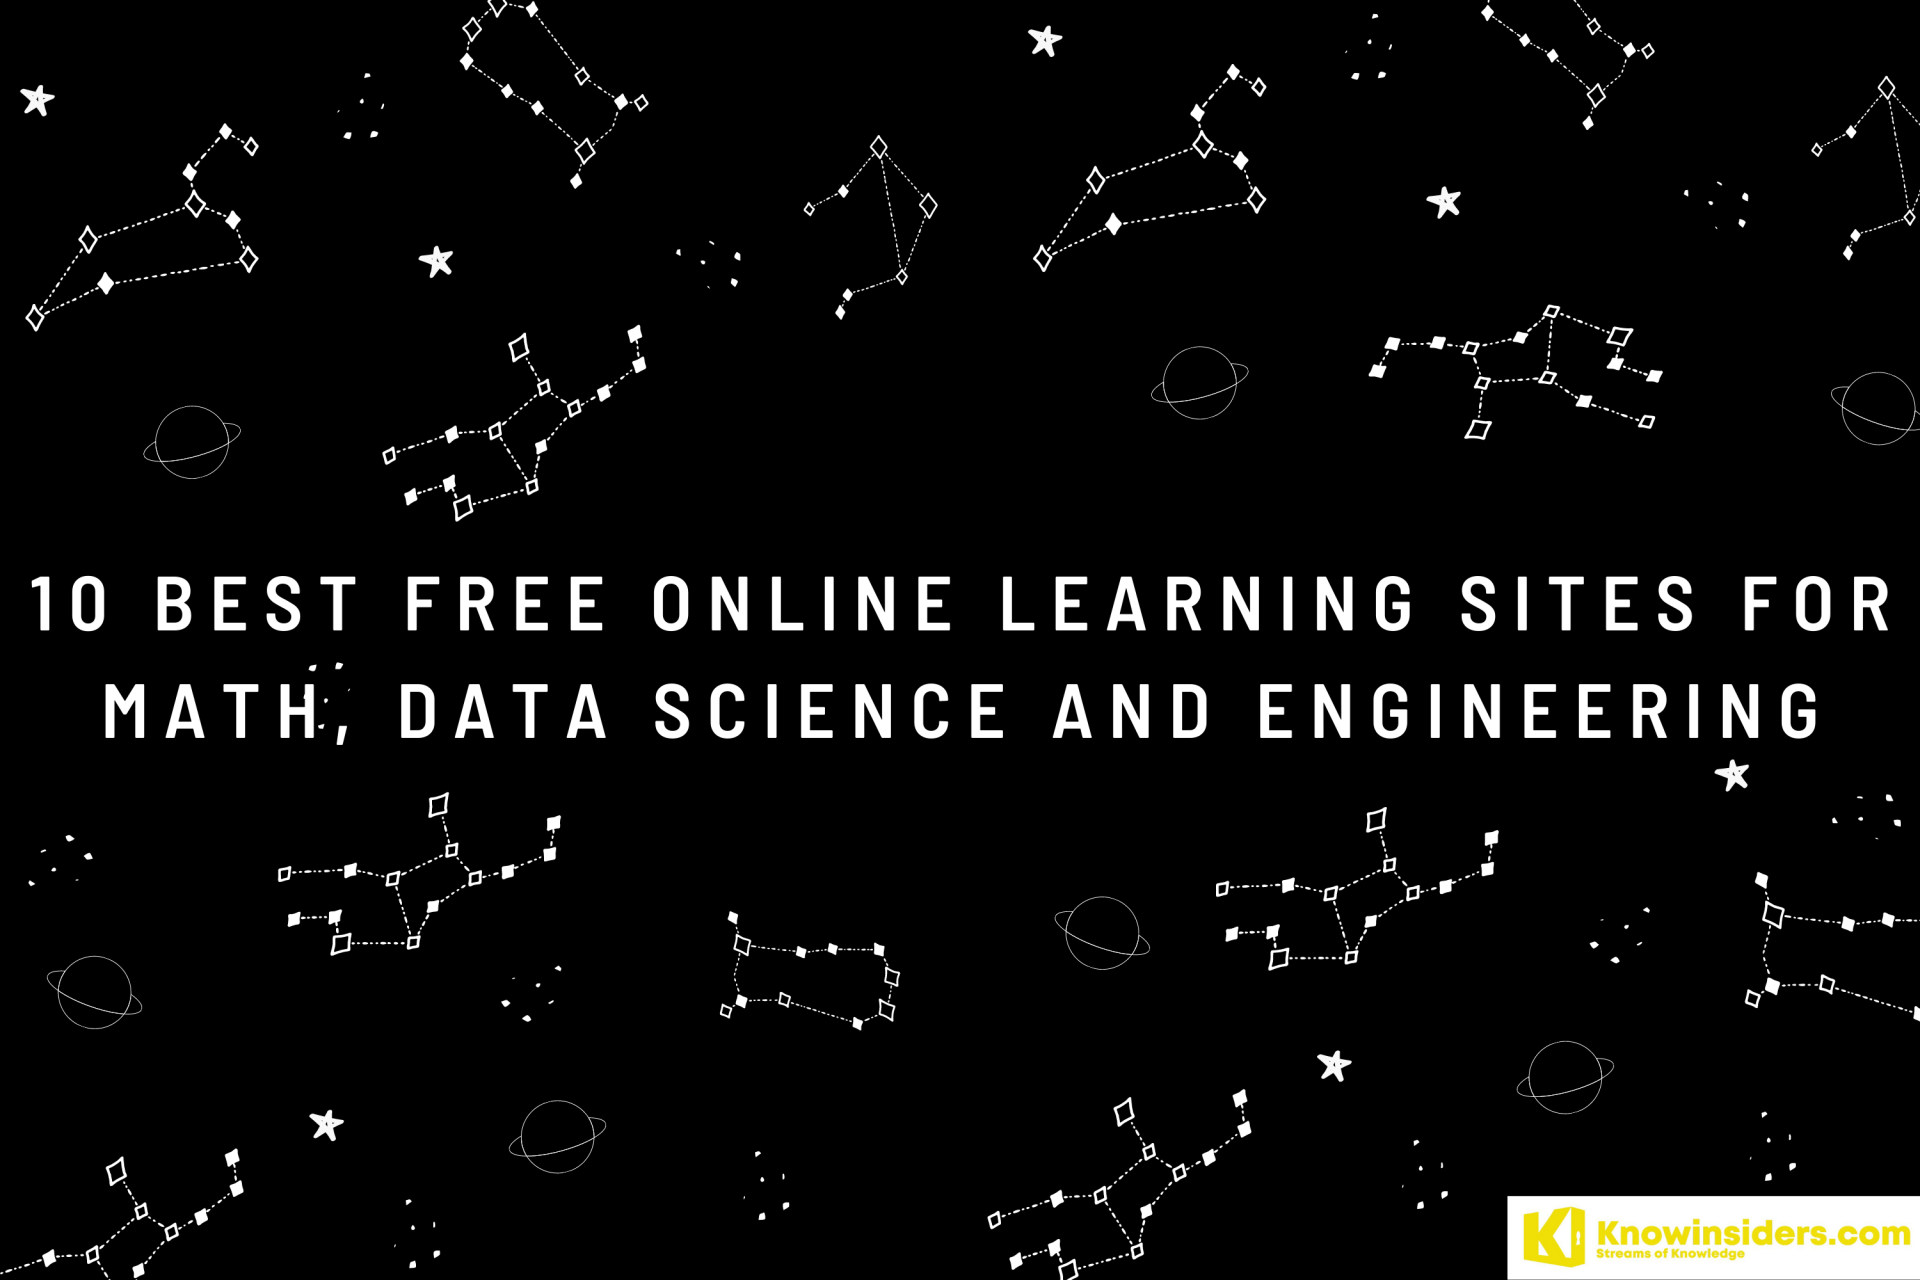 10 Best Free Online Learning Sites for Math, Data Science and Engineering